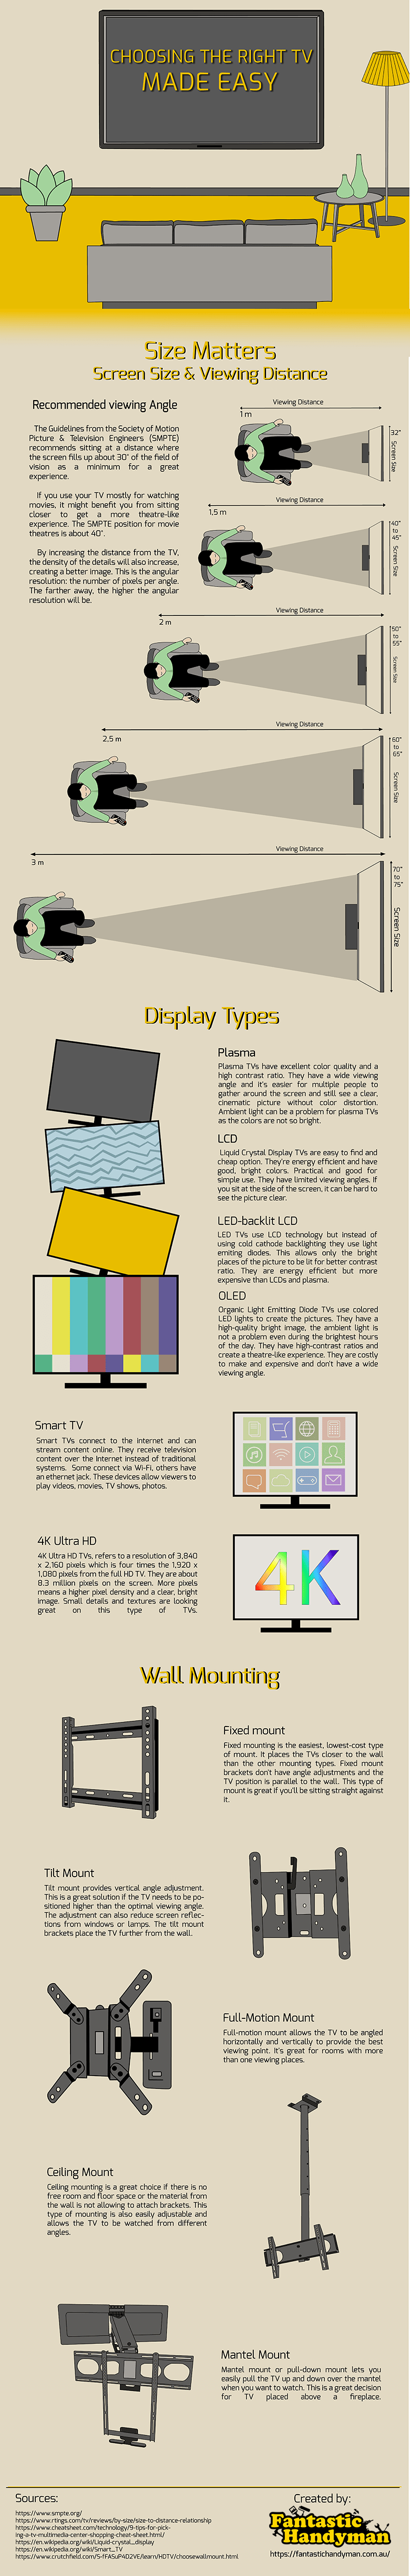 How to Choose the Perfect TV